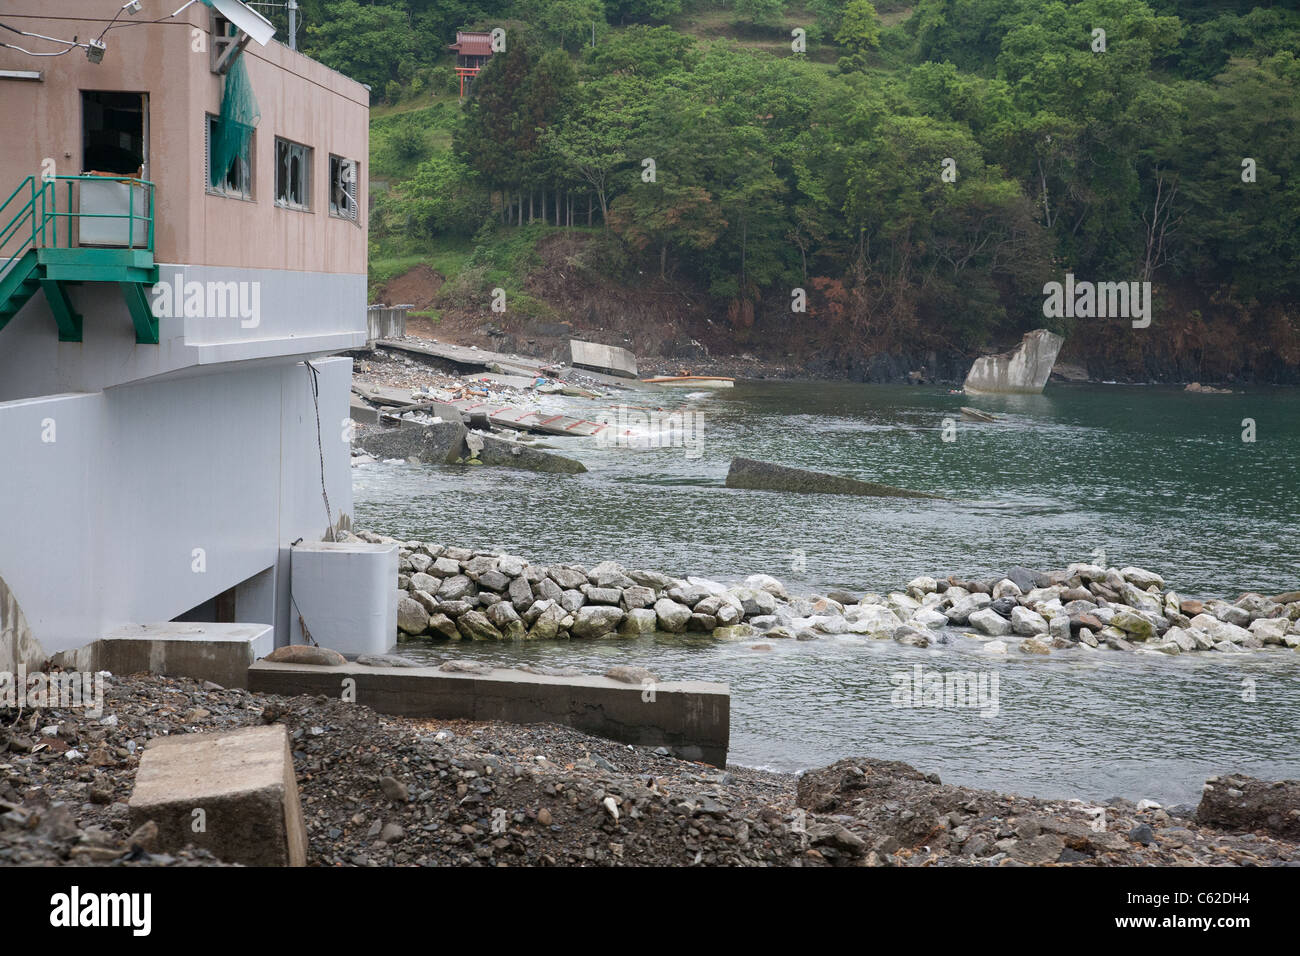 A failed seawall destroyed by the tsunami in Japan. Stock Photo